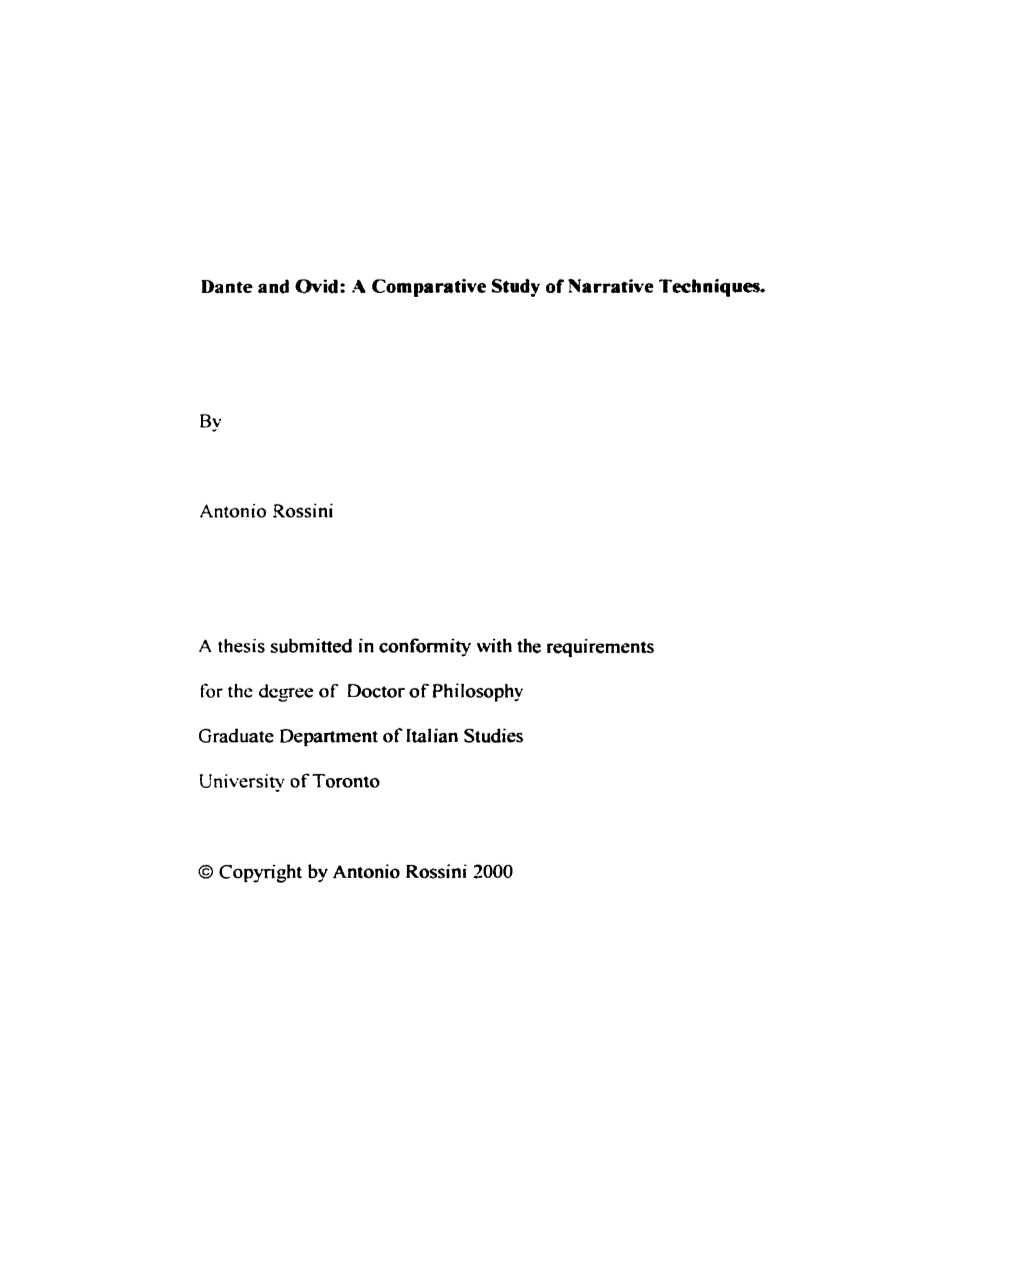 BY Antonio Rossini a Thesis Submitted in Conformity with the Requirements